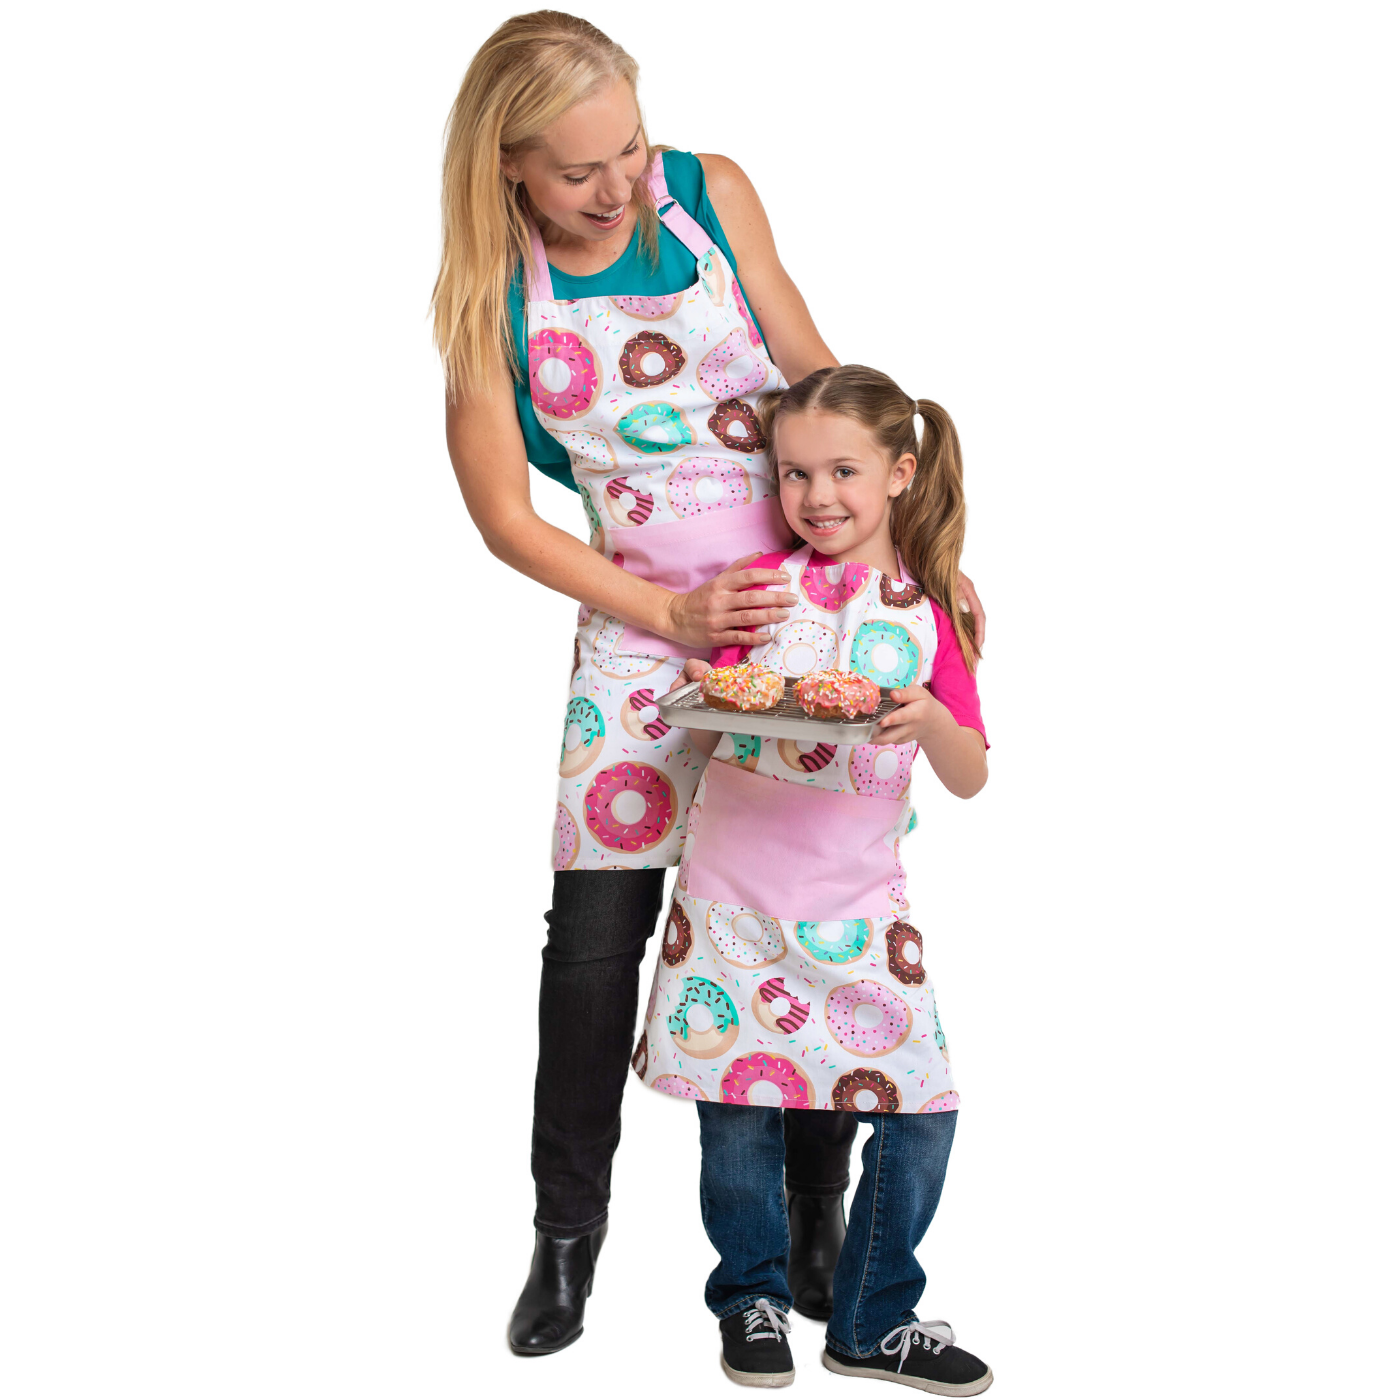 Lifestyle of mother and daughter holding donuts in Donut Print Adult and Kid Matching Apron Set Adult and Child Donut Printed Cotton Apron Set